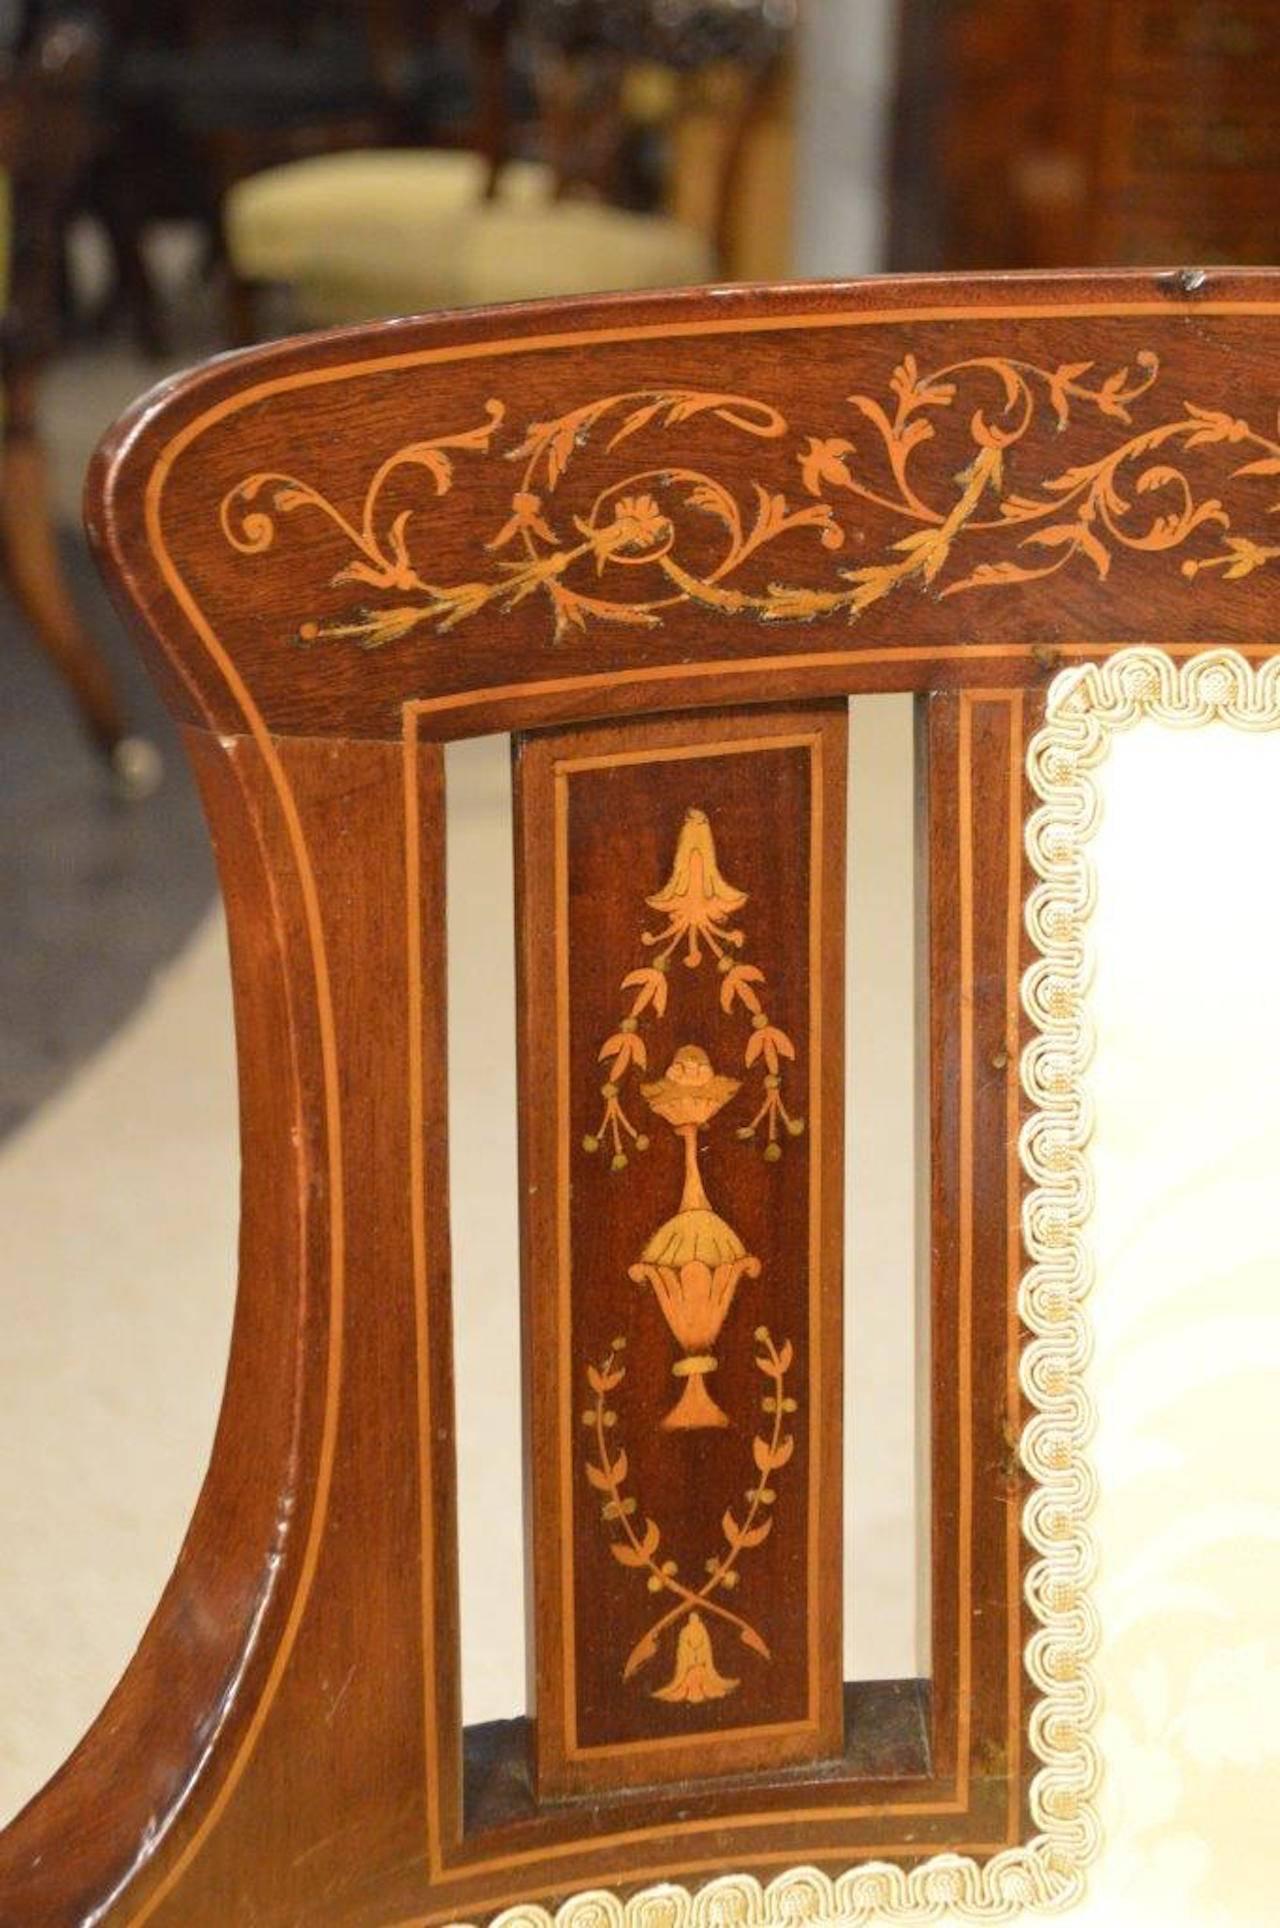 Mahogany and Marquetry Inlaid Edwardian Period Antique Tub Chair 2